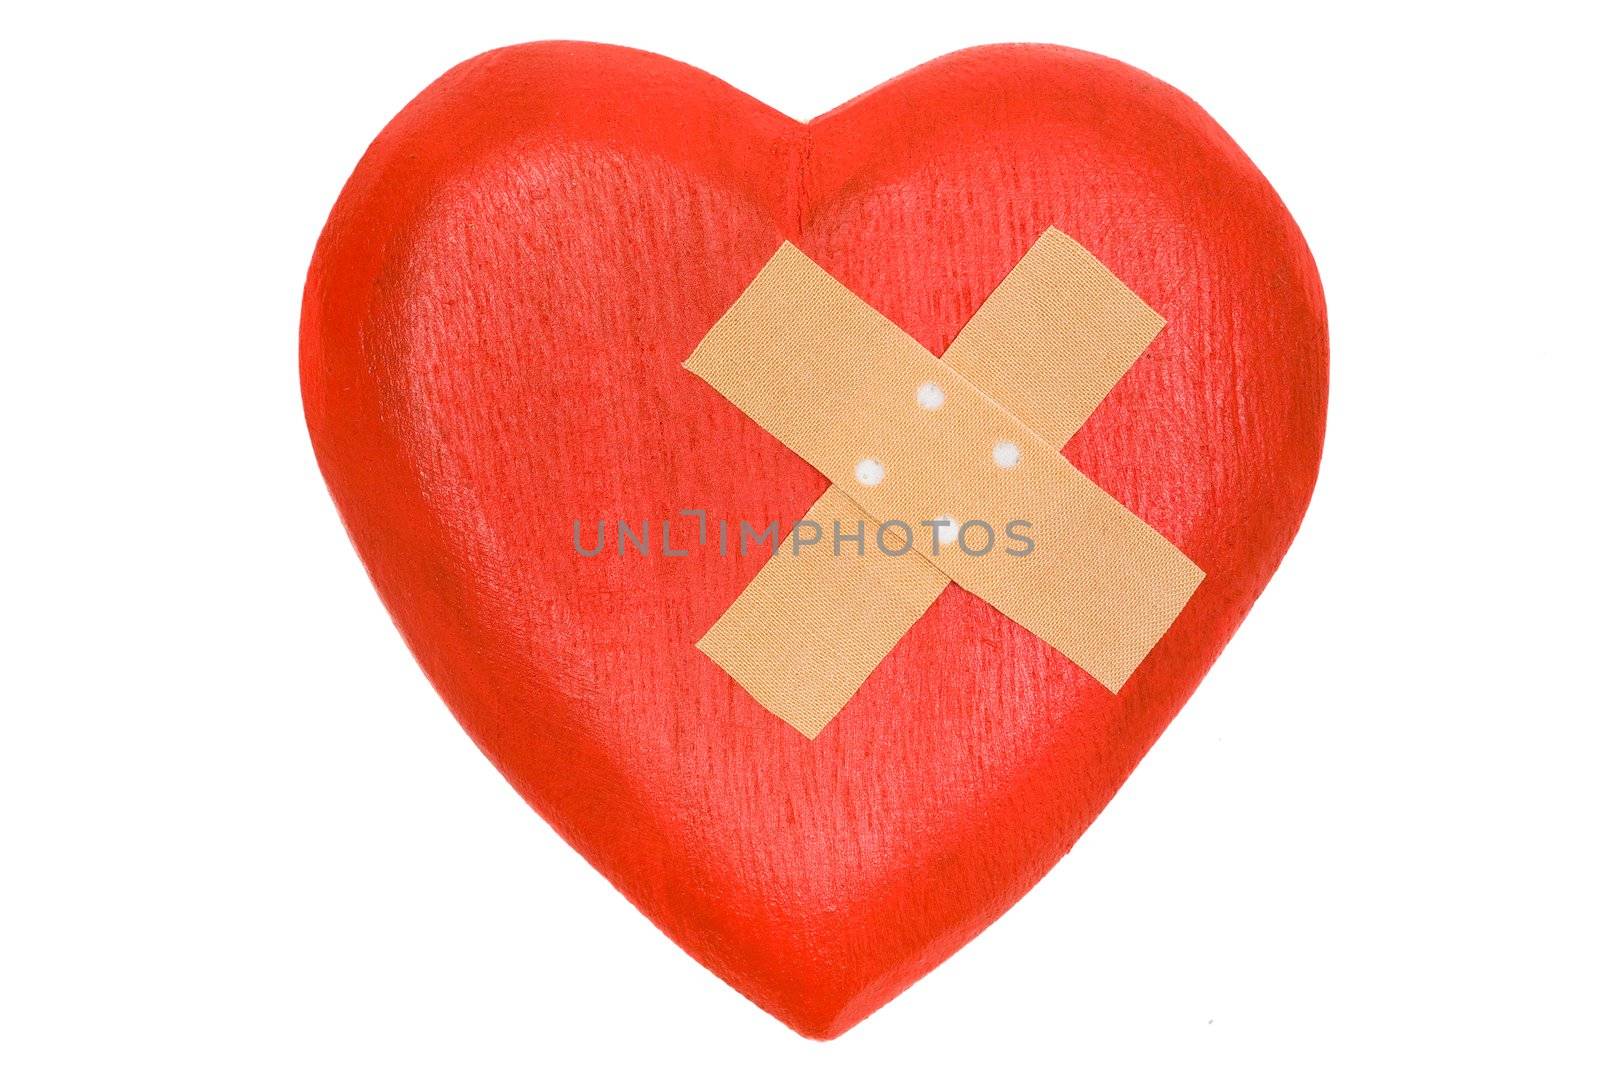 Wooden heart with a plaster. Isolated on a white background.